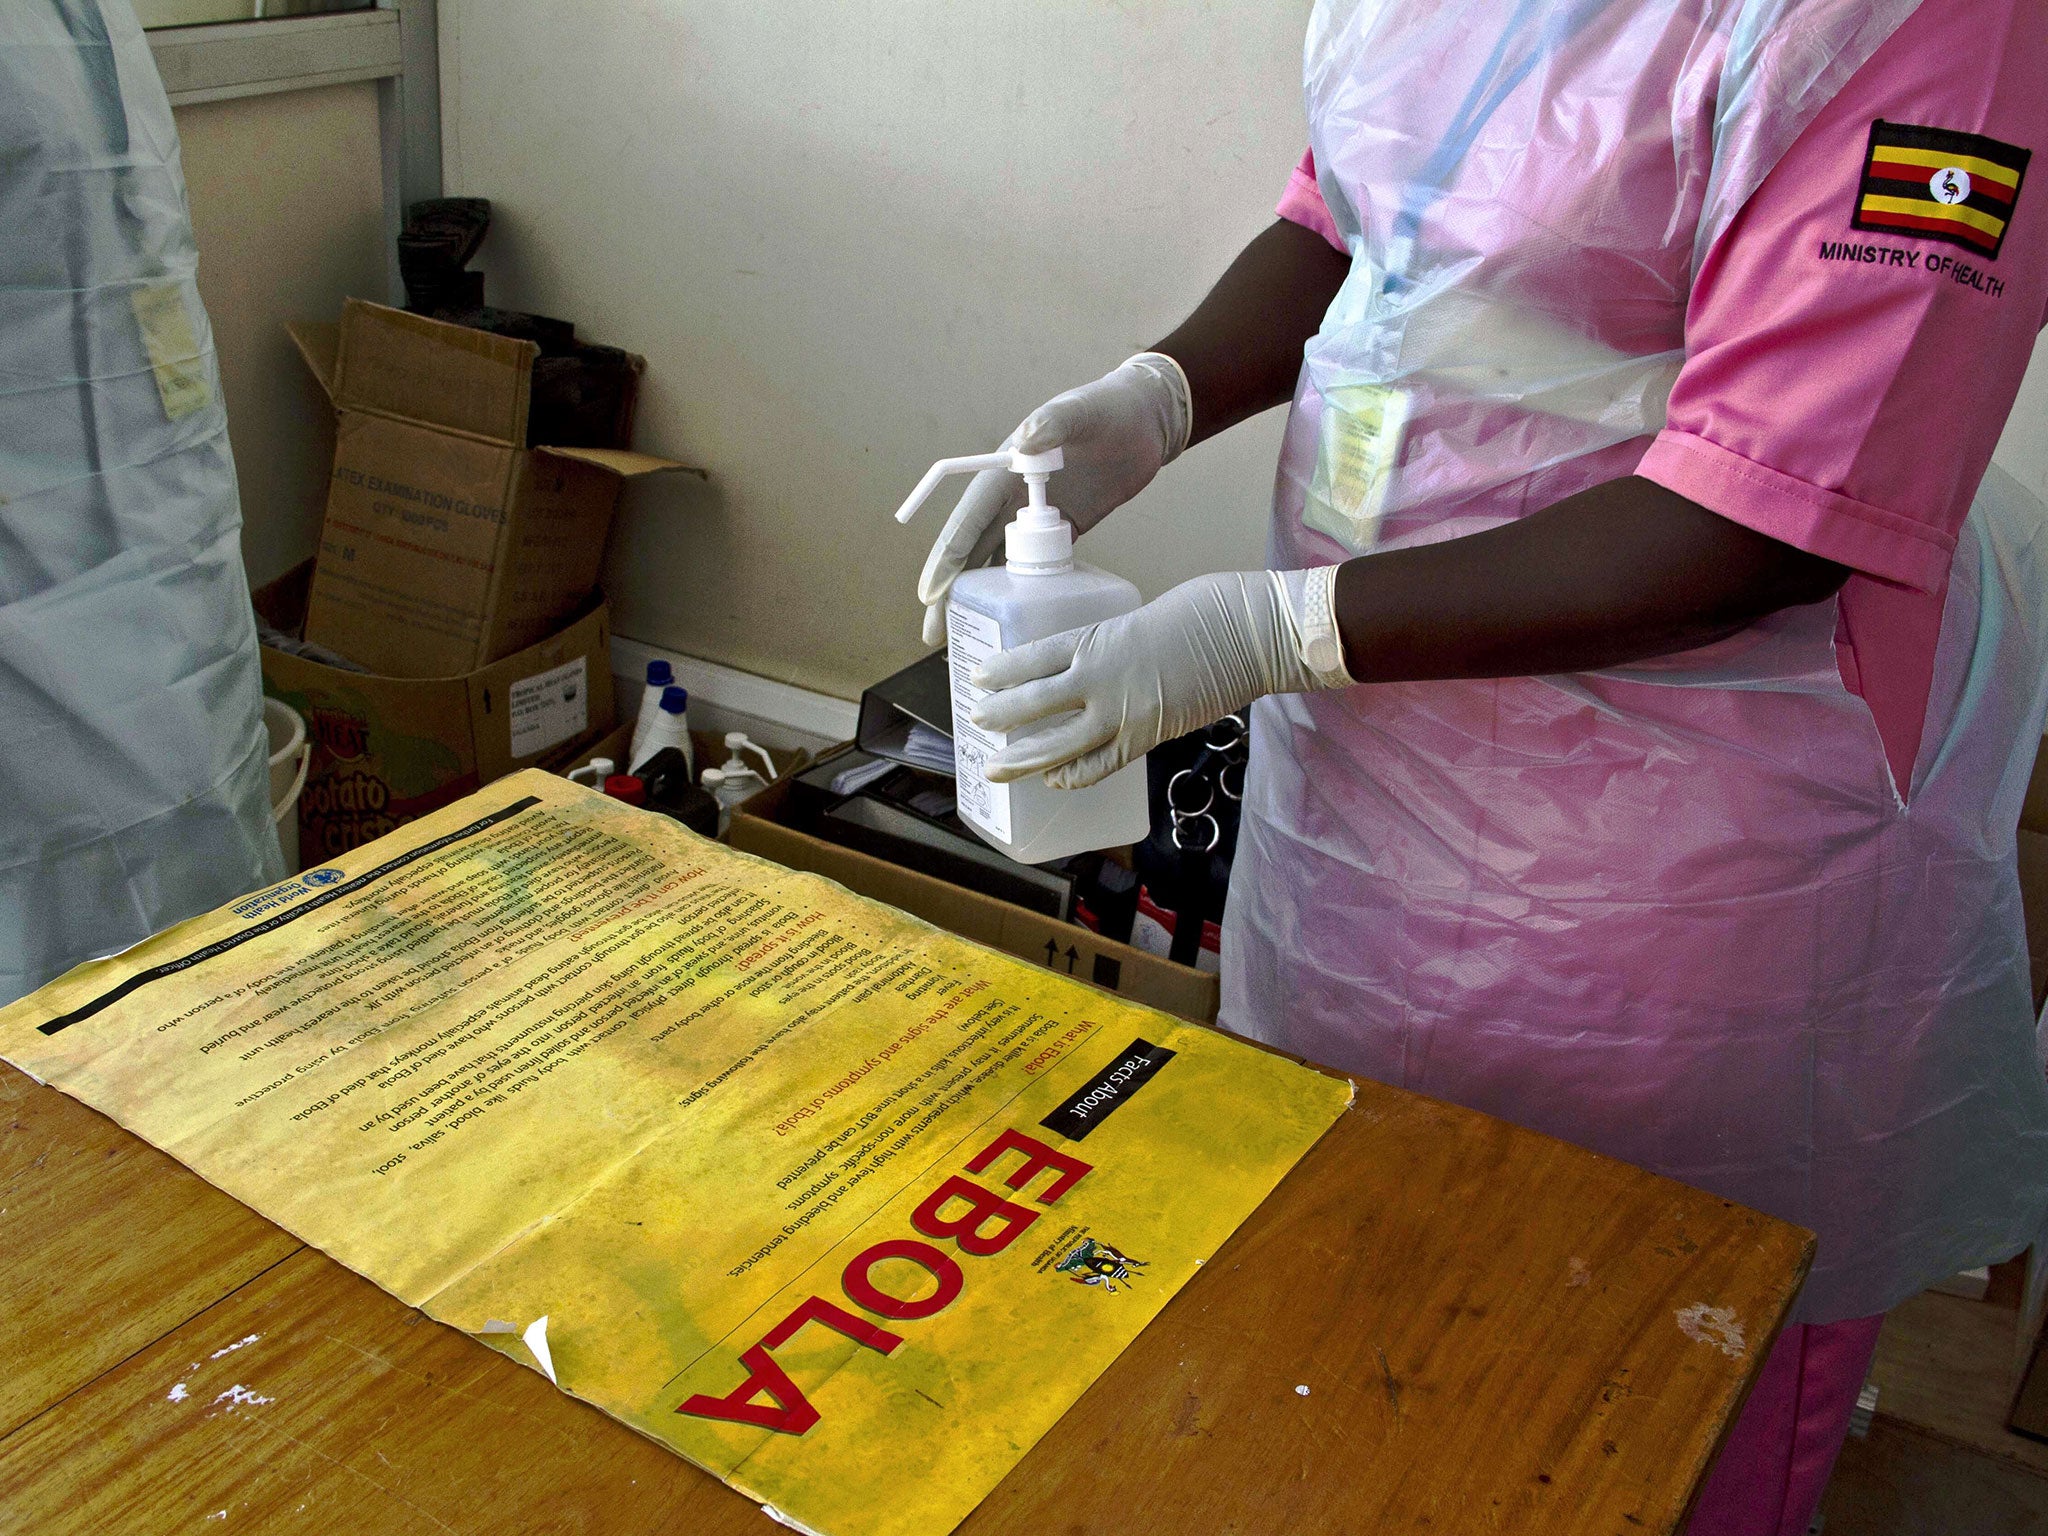 The Ebola outbreak has been traced to a suspected 'patient zero' - a two-year-old boy